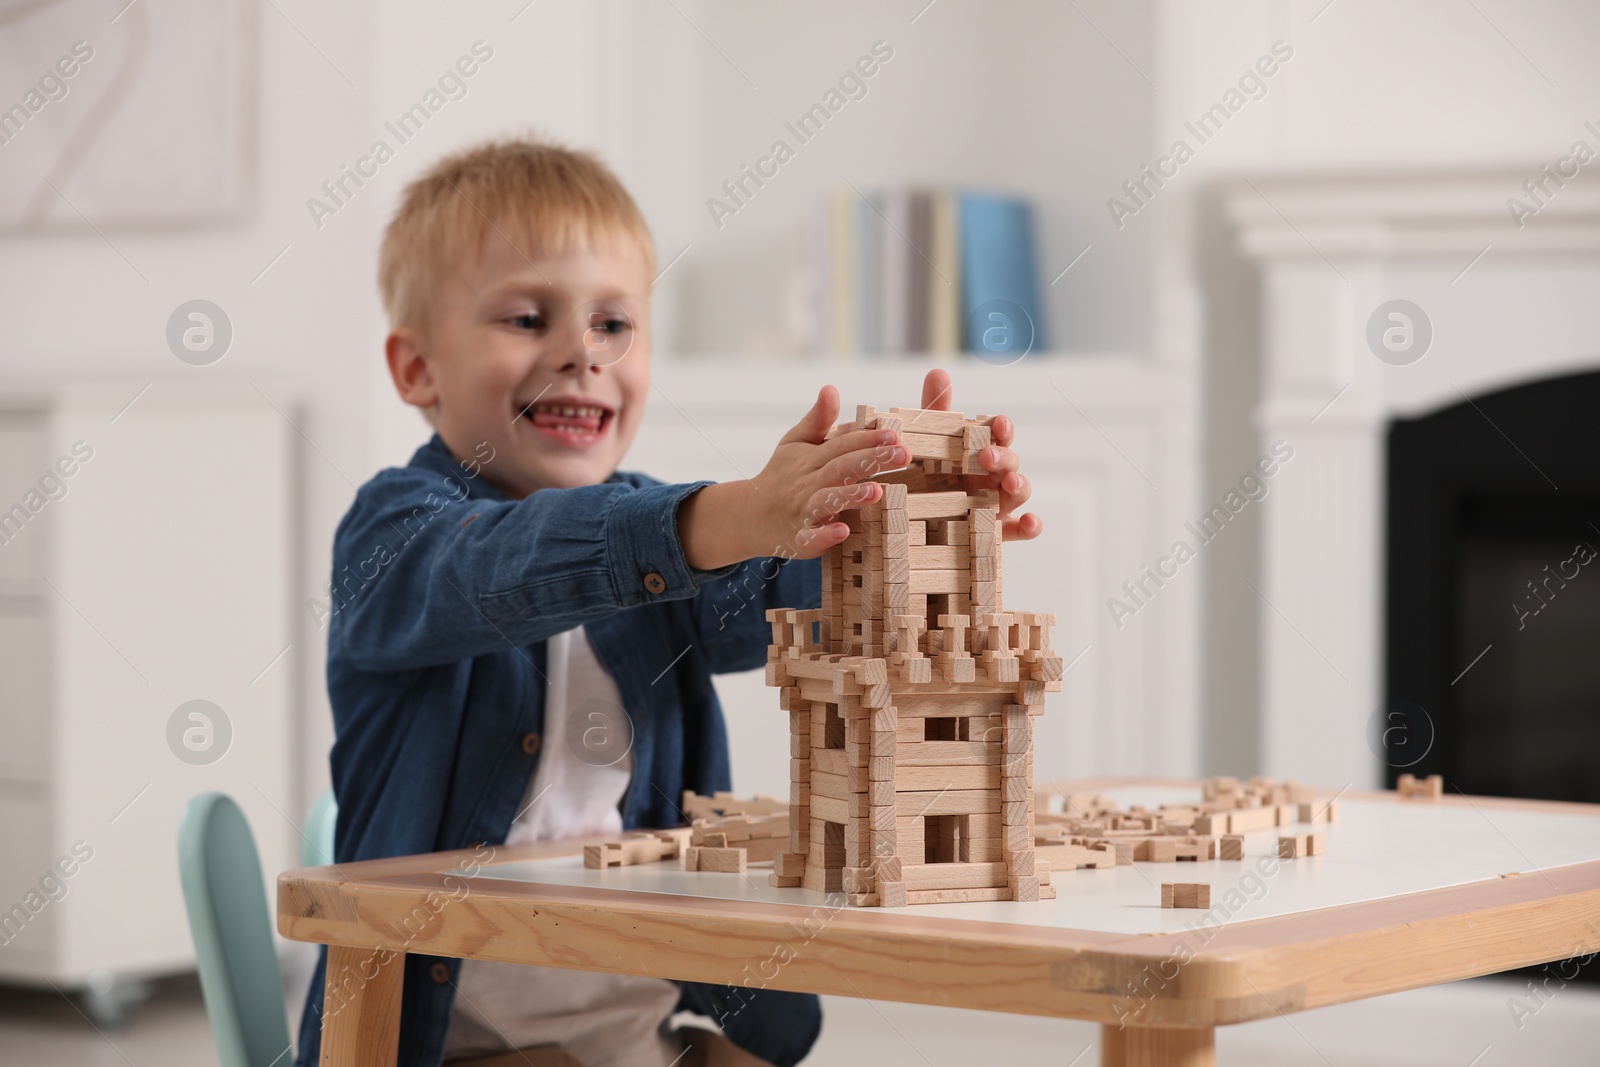 Photo of Cute little boy playing with wooden tower at table indoors. Child's toy